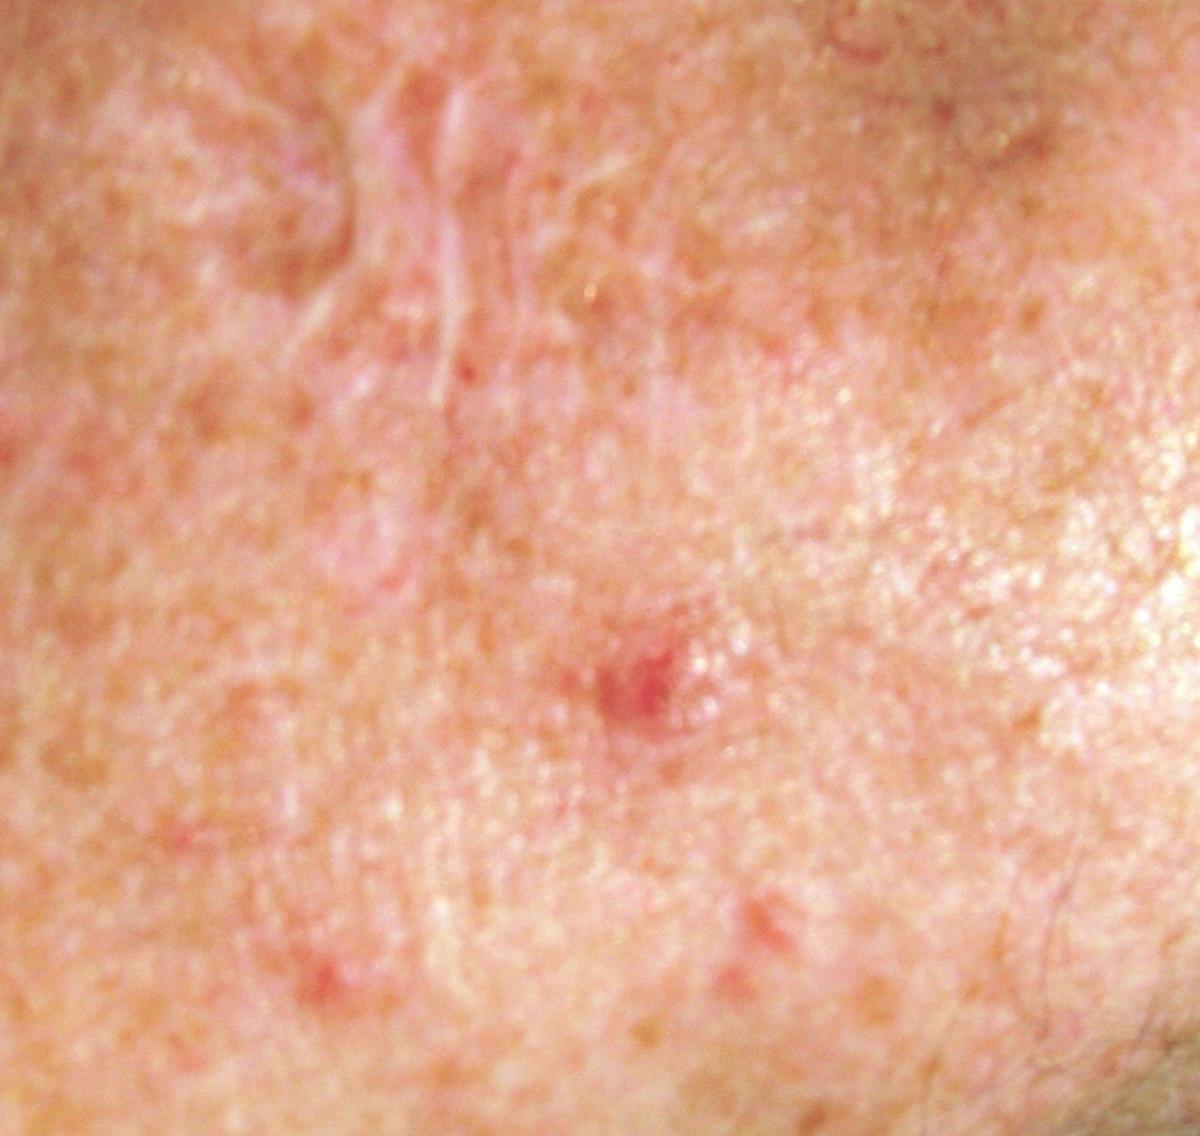 basal cell carcinoma after treatment